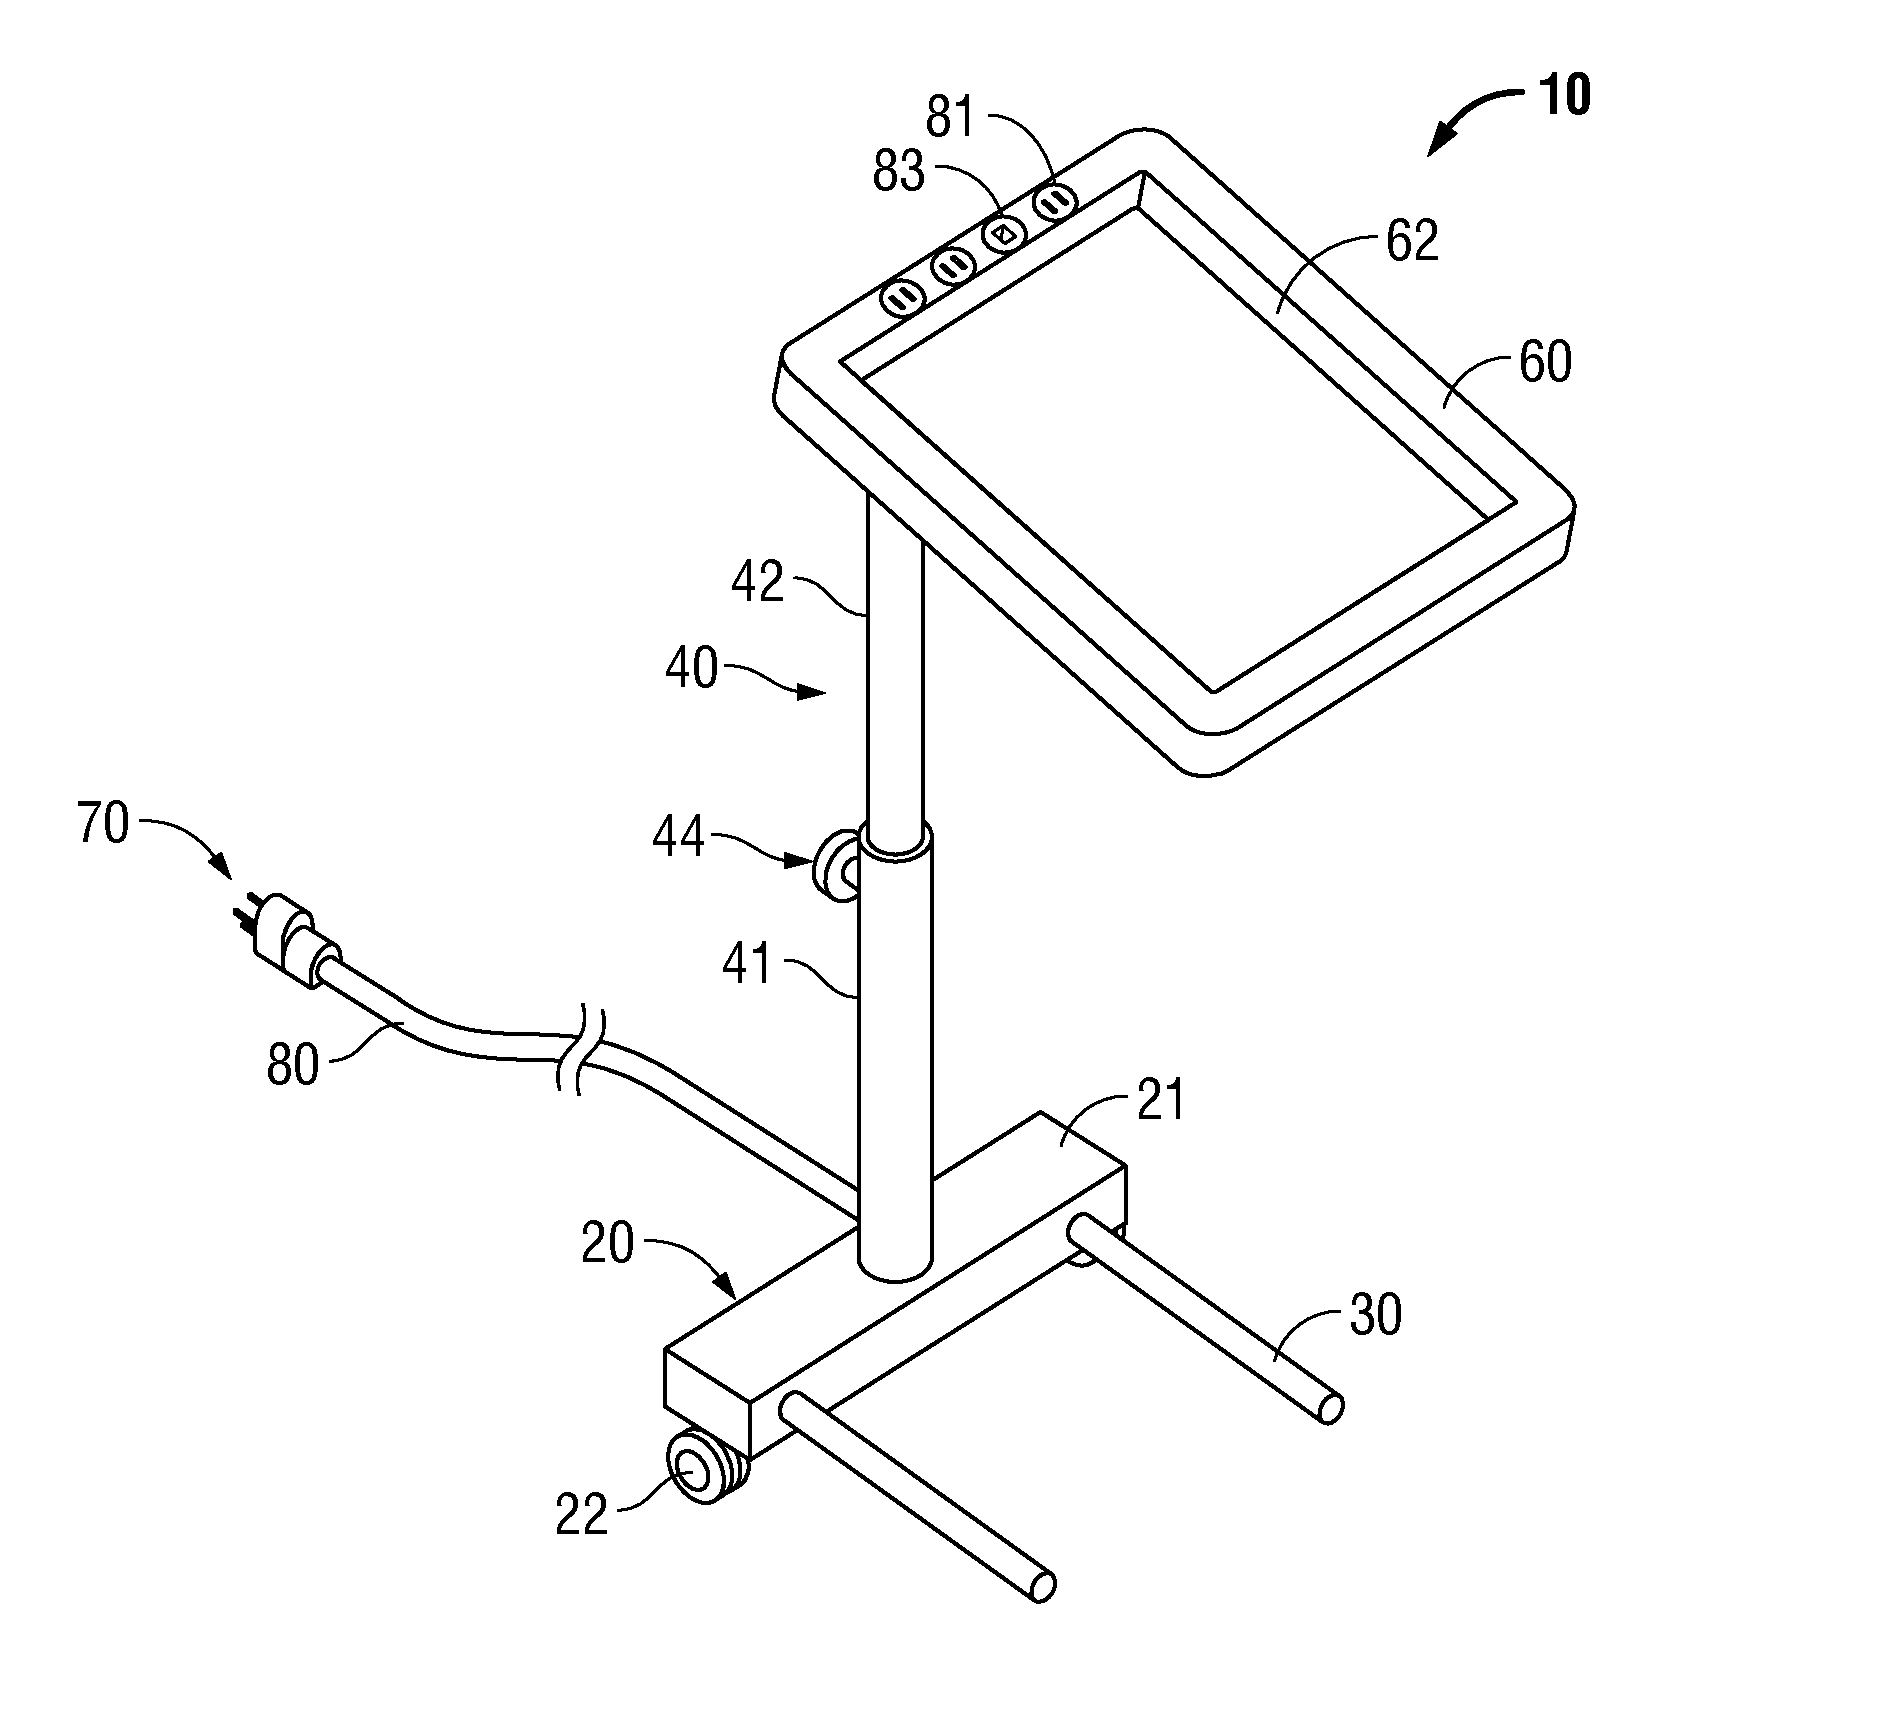 Surgical tray assemblies for storing, charging, powering, and/or communicating with surgical instruments